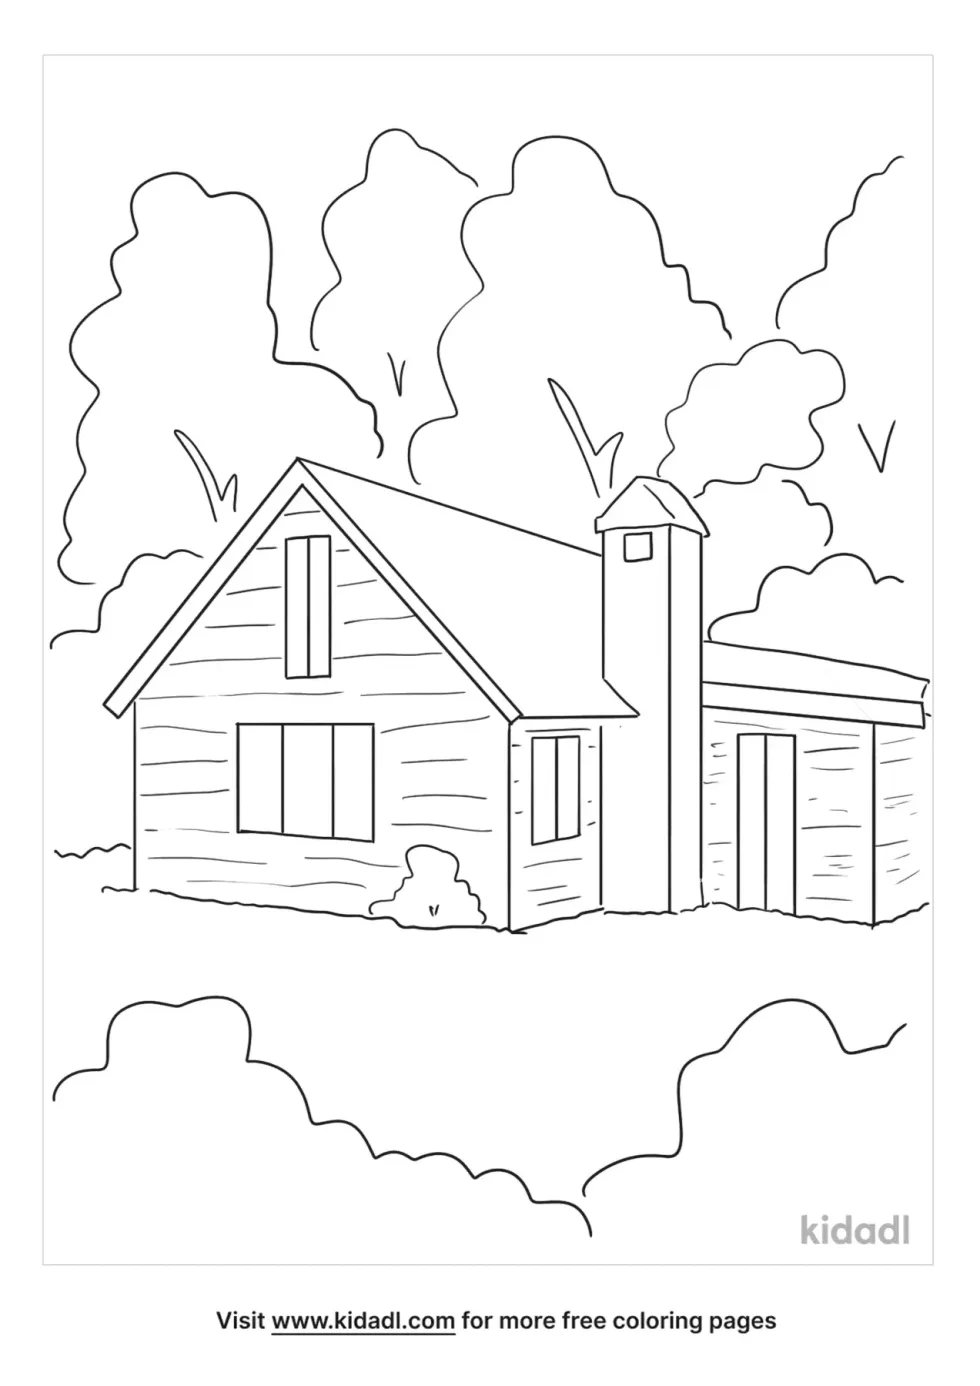 House In The Woods Coloring Page